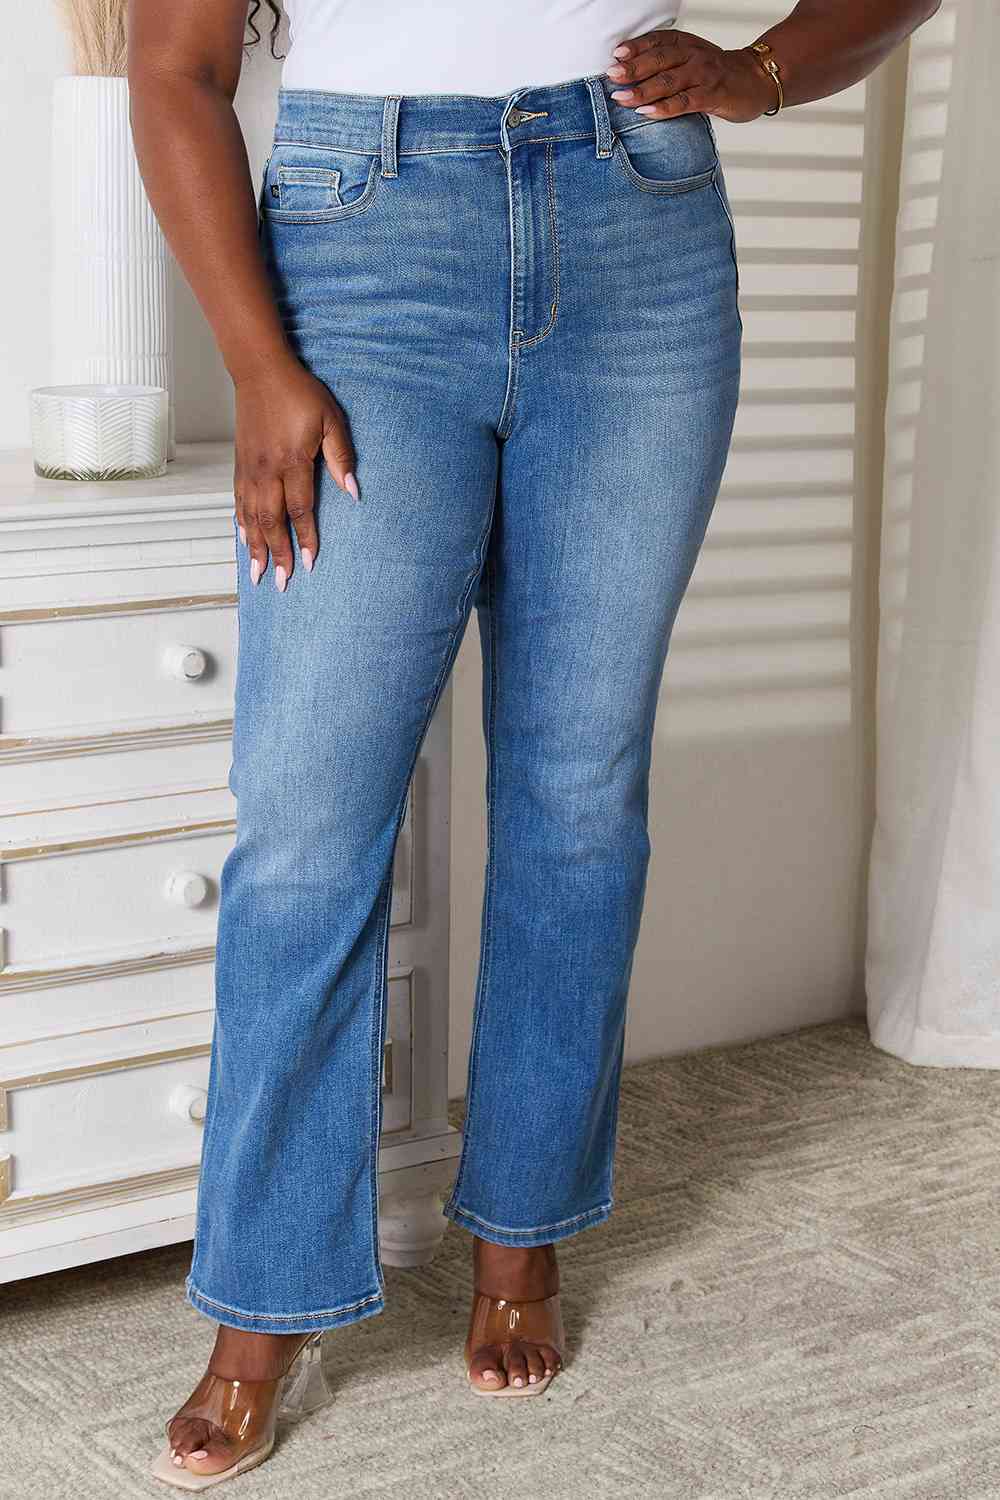 Plus Size, Judy Blue, High Waist Classic Contrast Wash Bootcut Jeans Style 82515